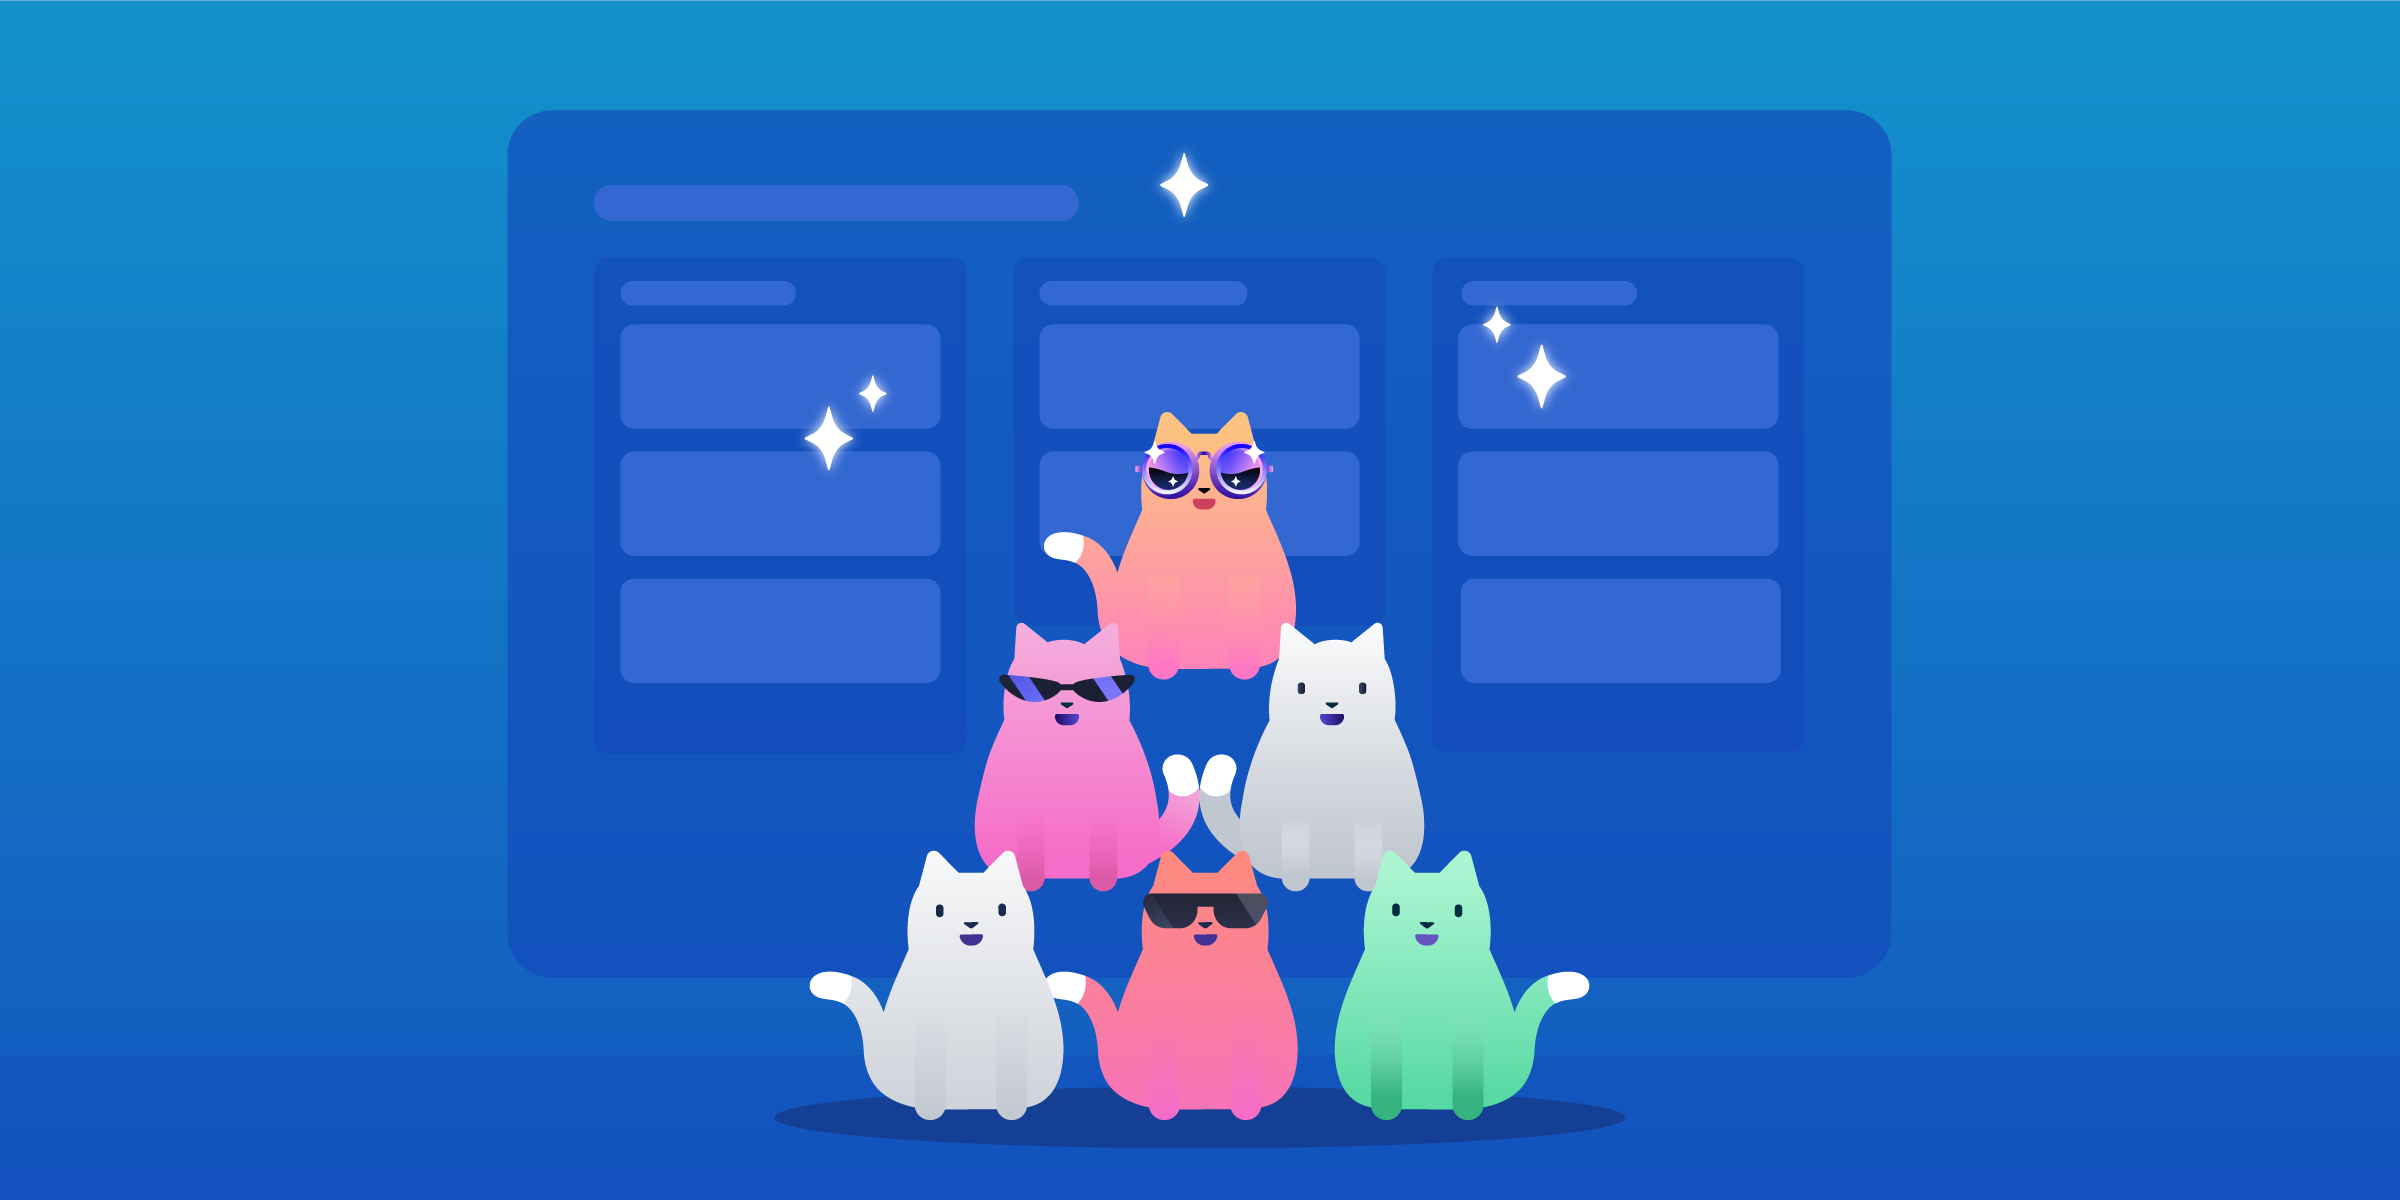 How We Use Trello to Manage Releases - Cognito Forms